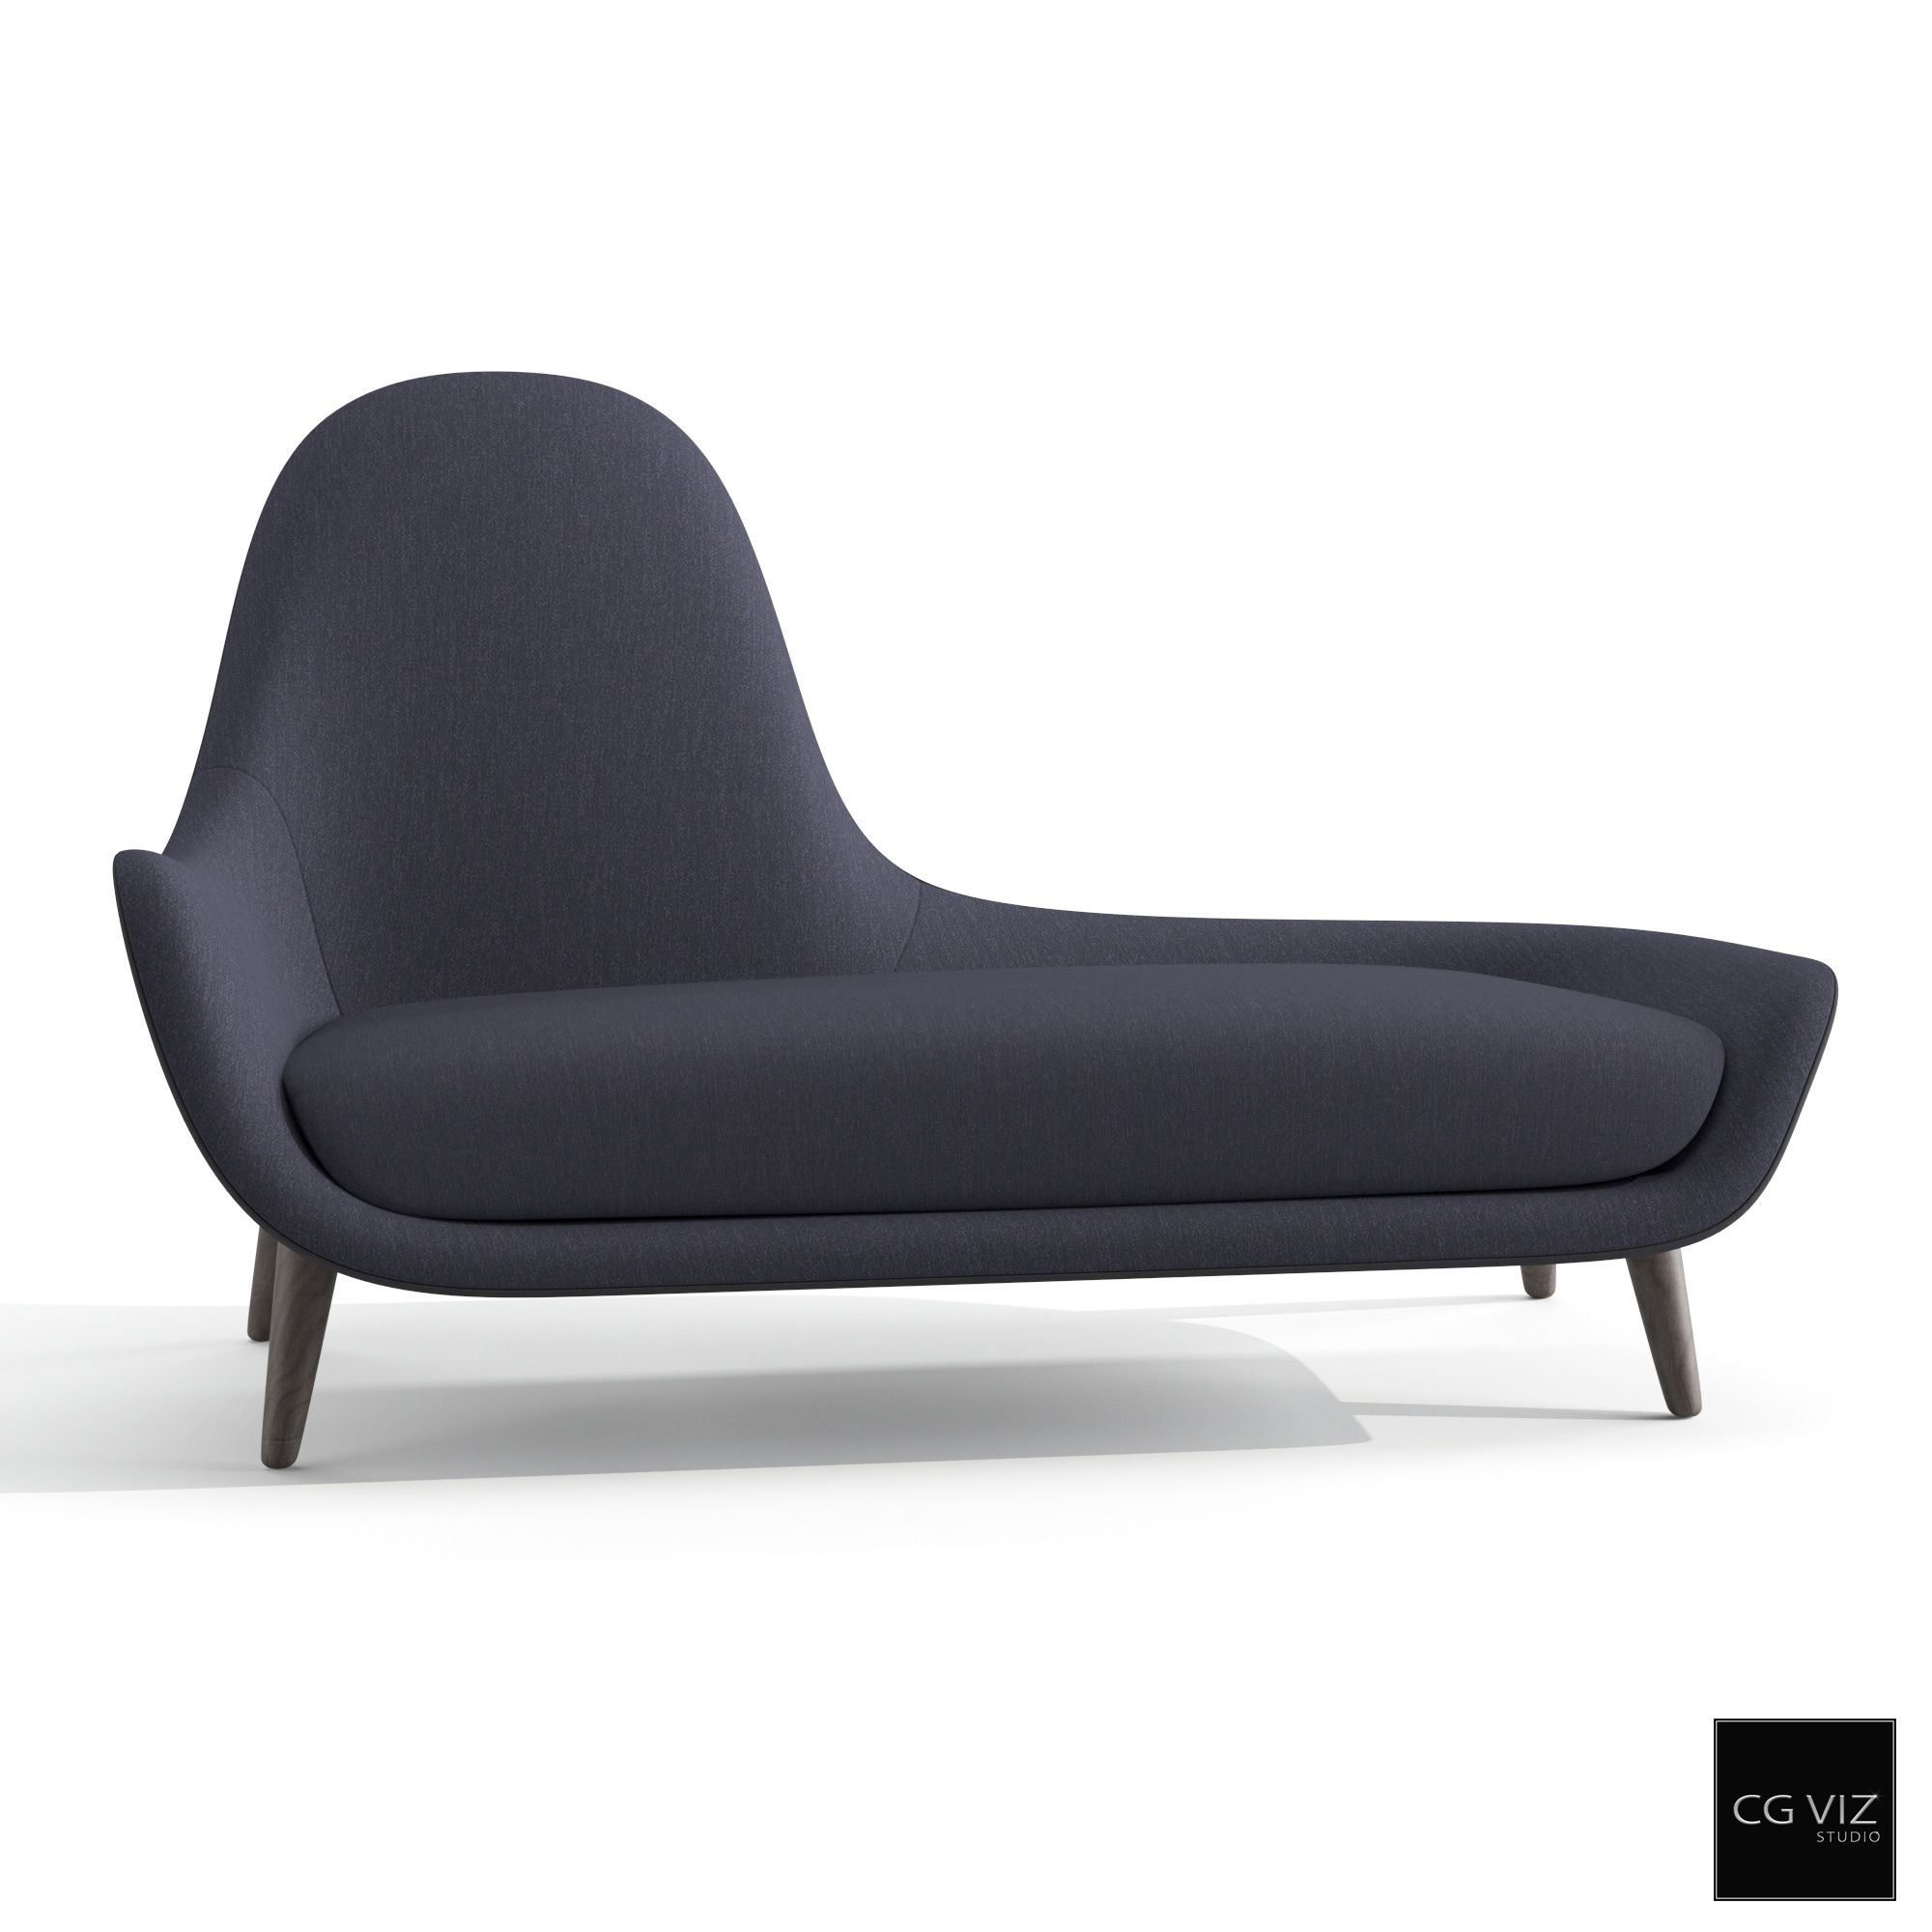 Rendered Preview of Poliform Mad Chaise Longue 3D Model